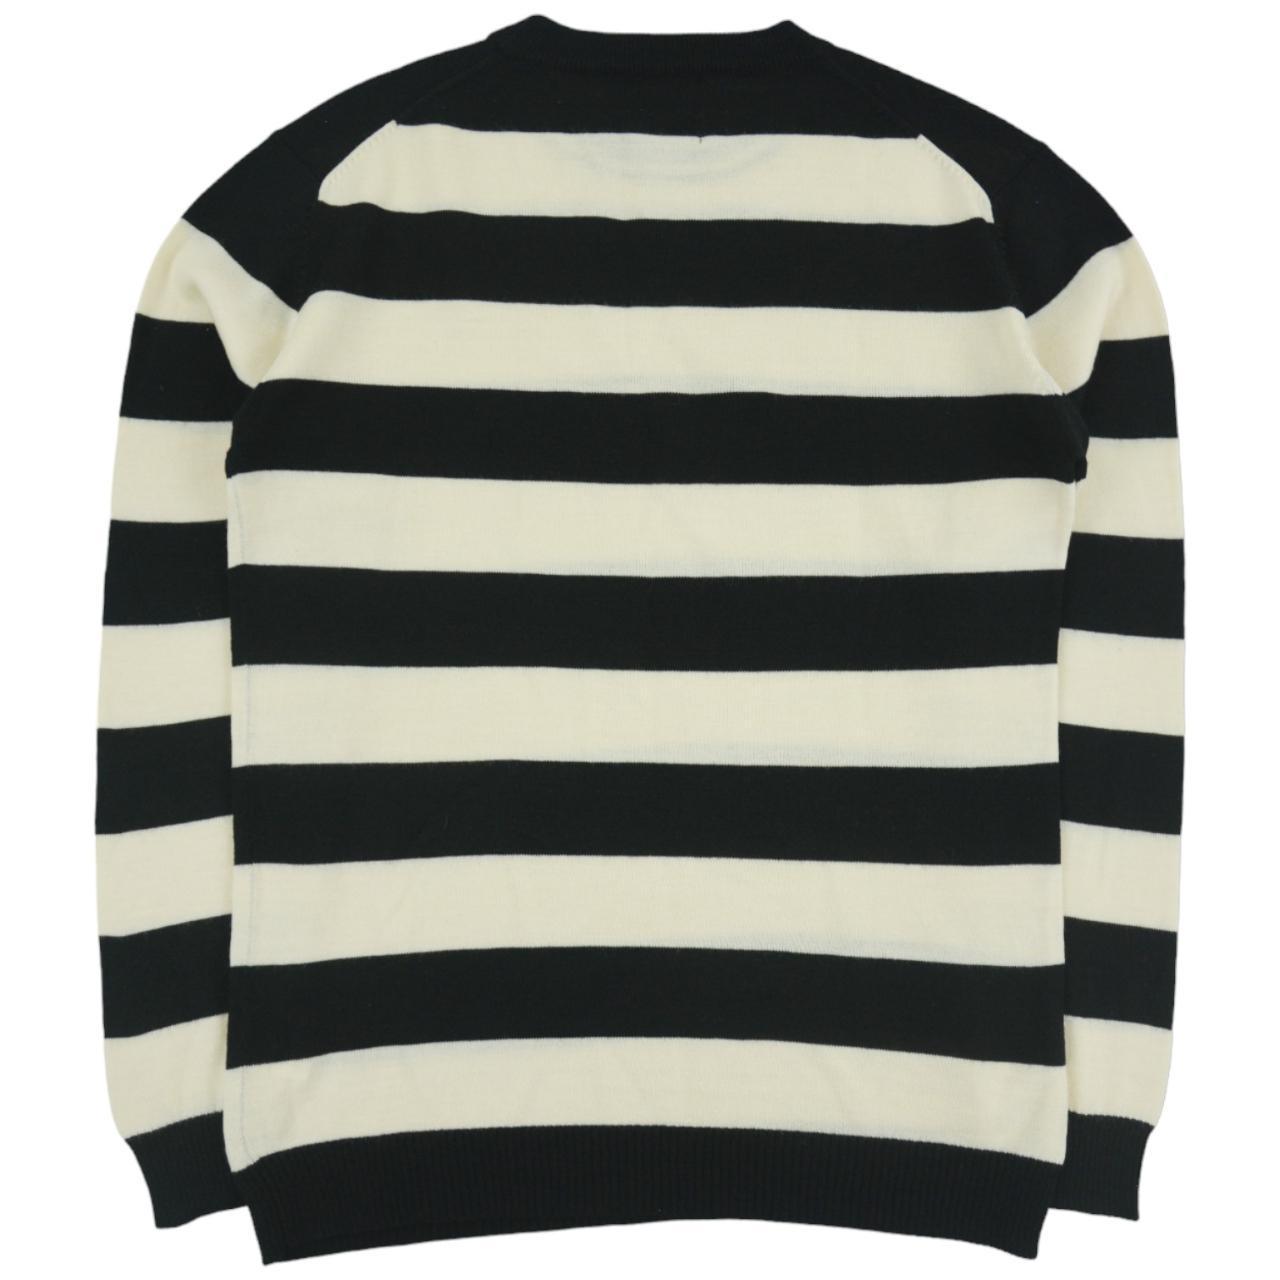 Vintage PPFM Striped Knitted Jumper Size S - Known Source